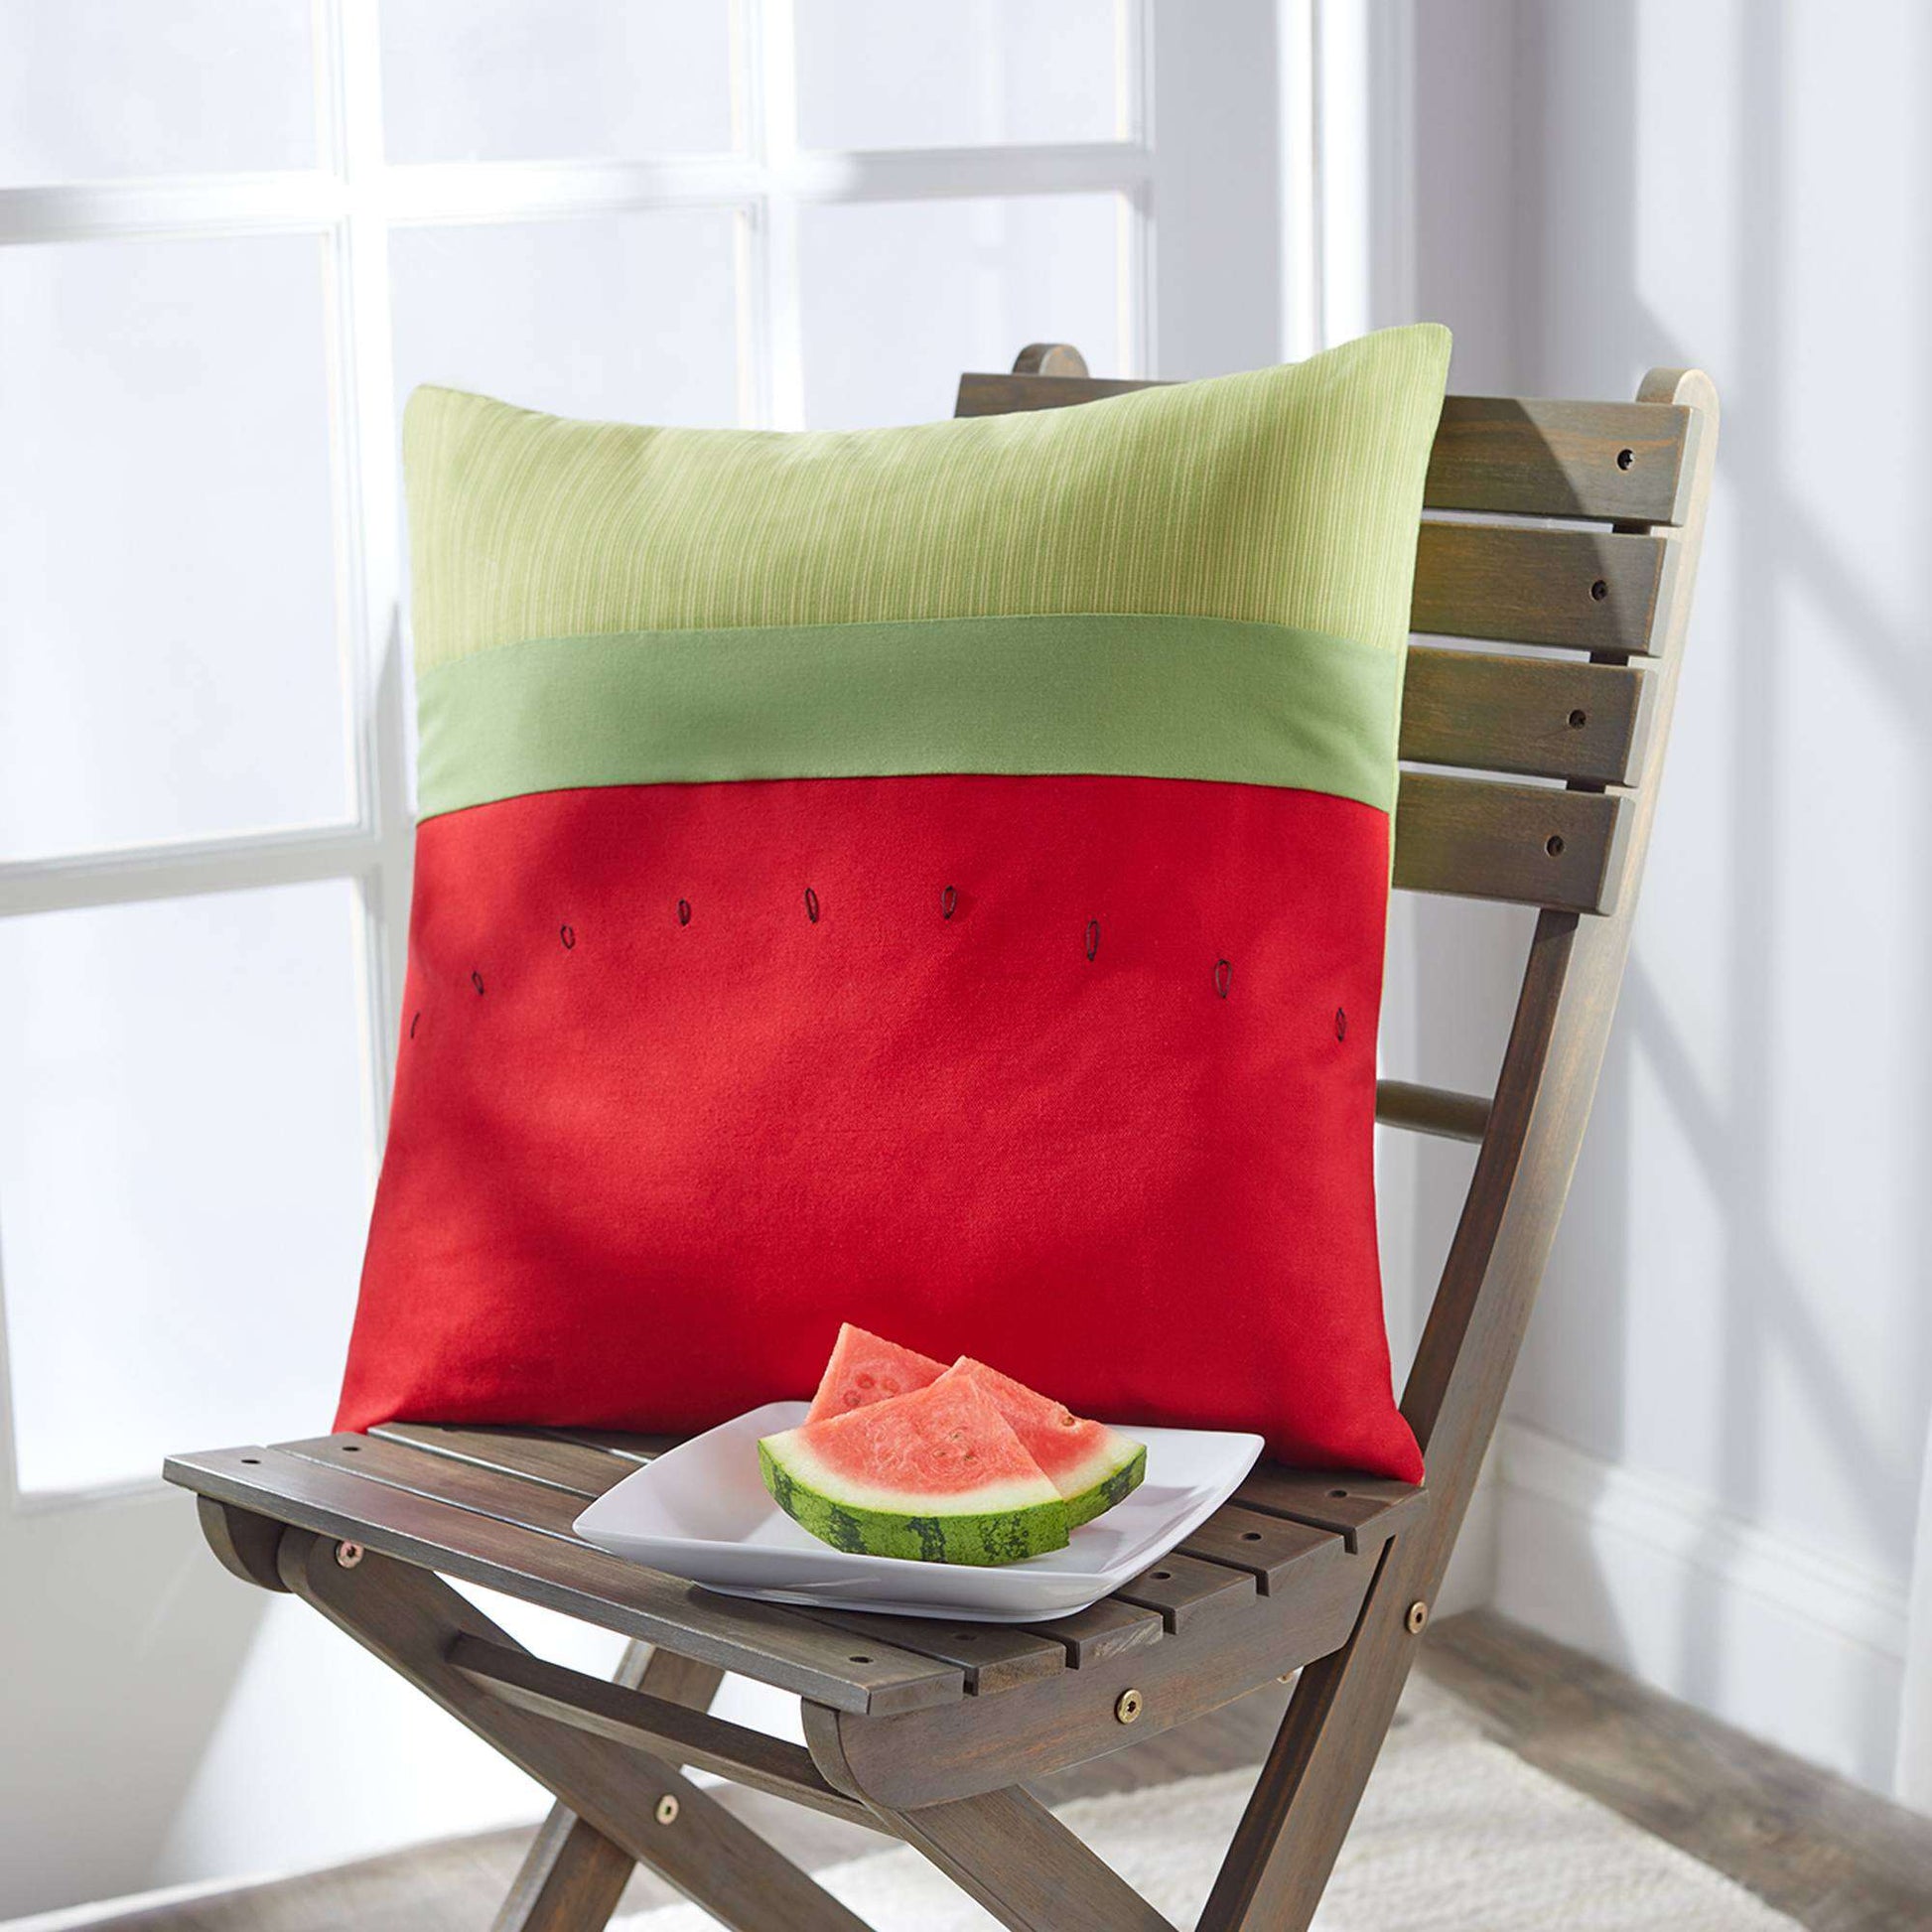 Free Coats & Clark Watermelon Patio Pillow For Outdoor Decor Sewing Pattern